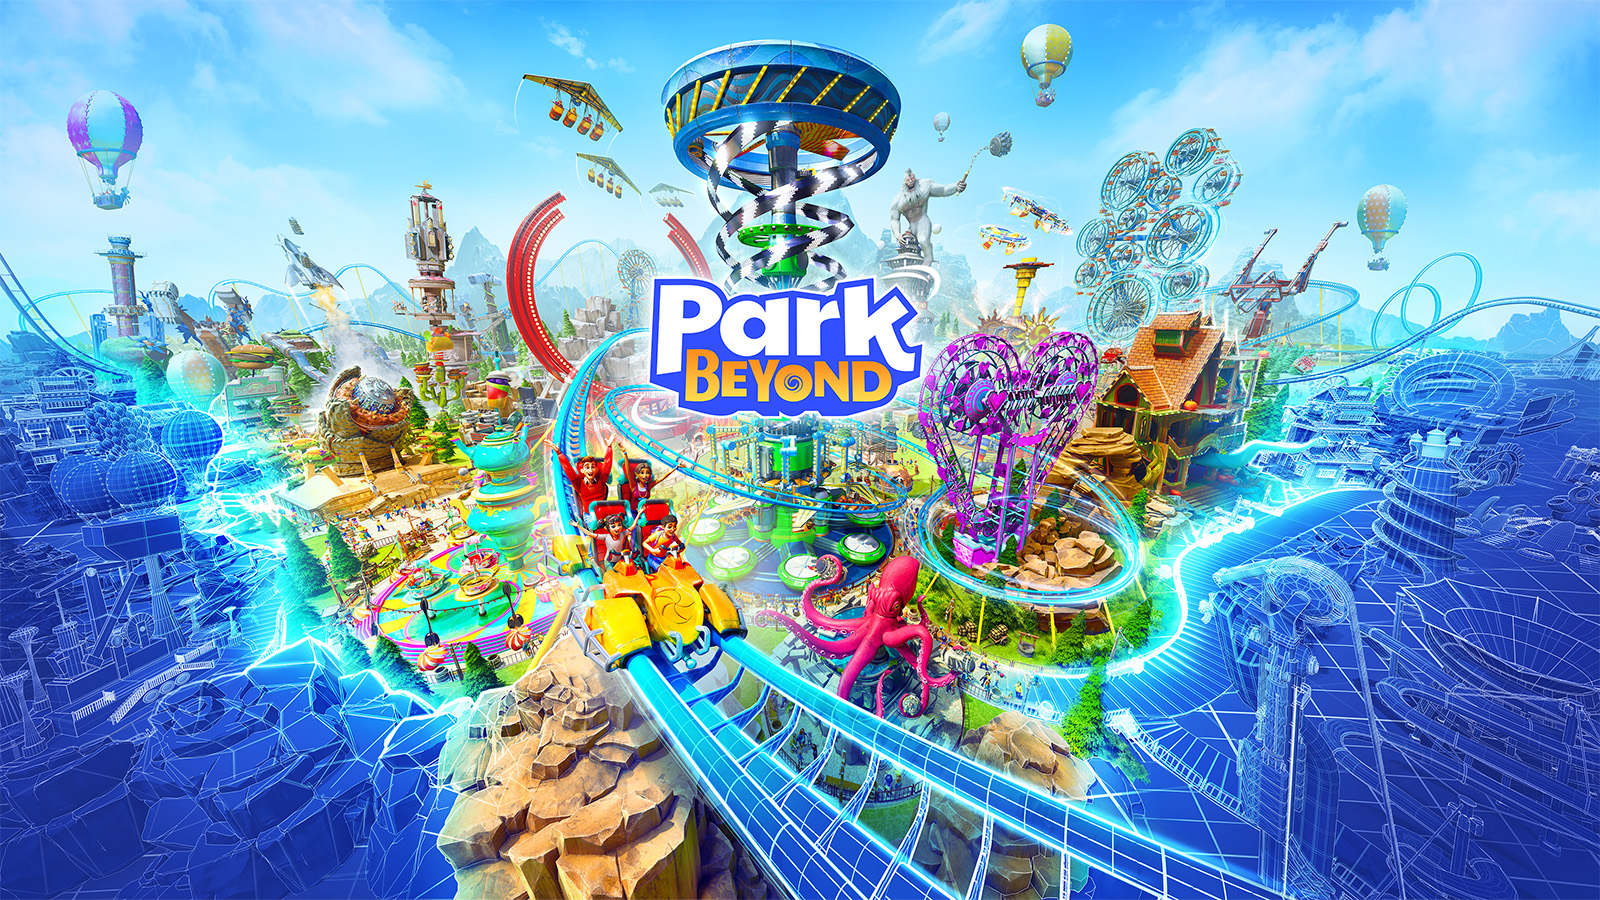 Park Beyond Gets New Gameplay Trailer Ahead Of Closed Beta Test